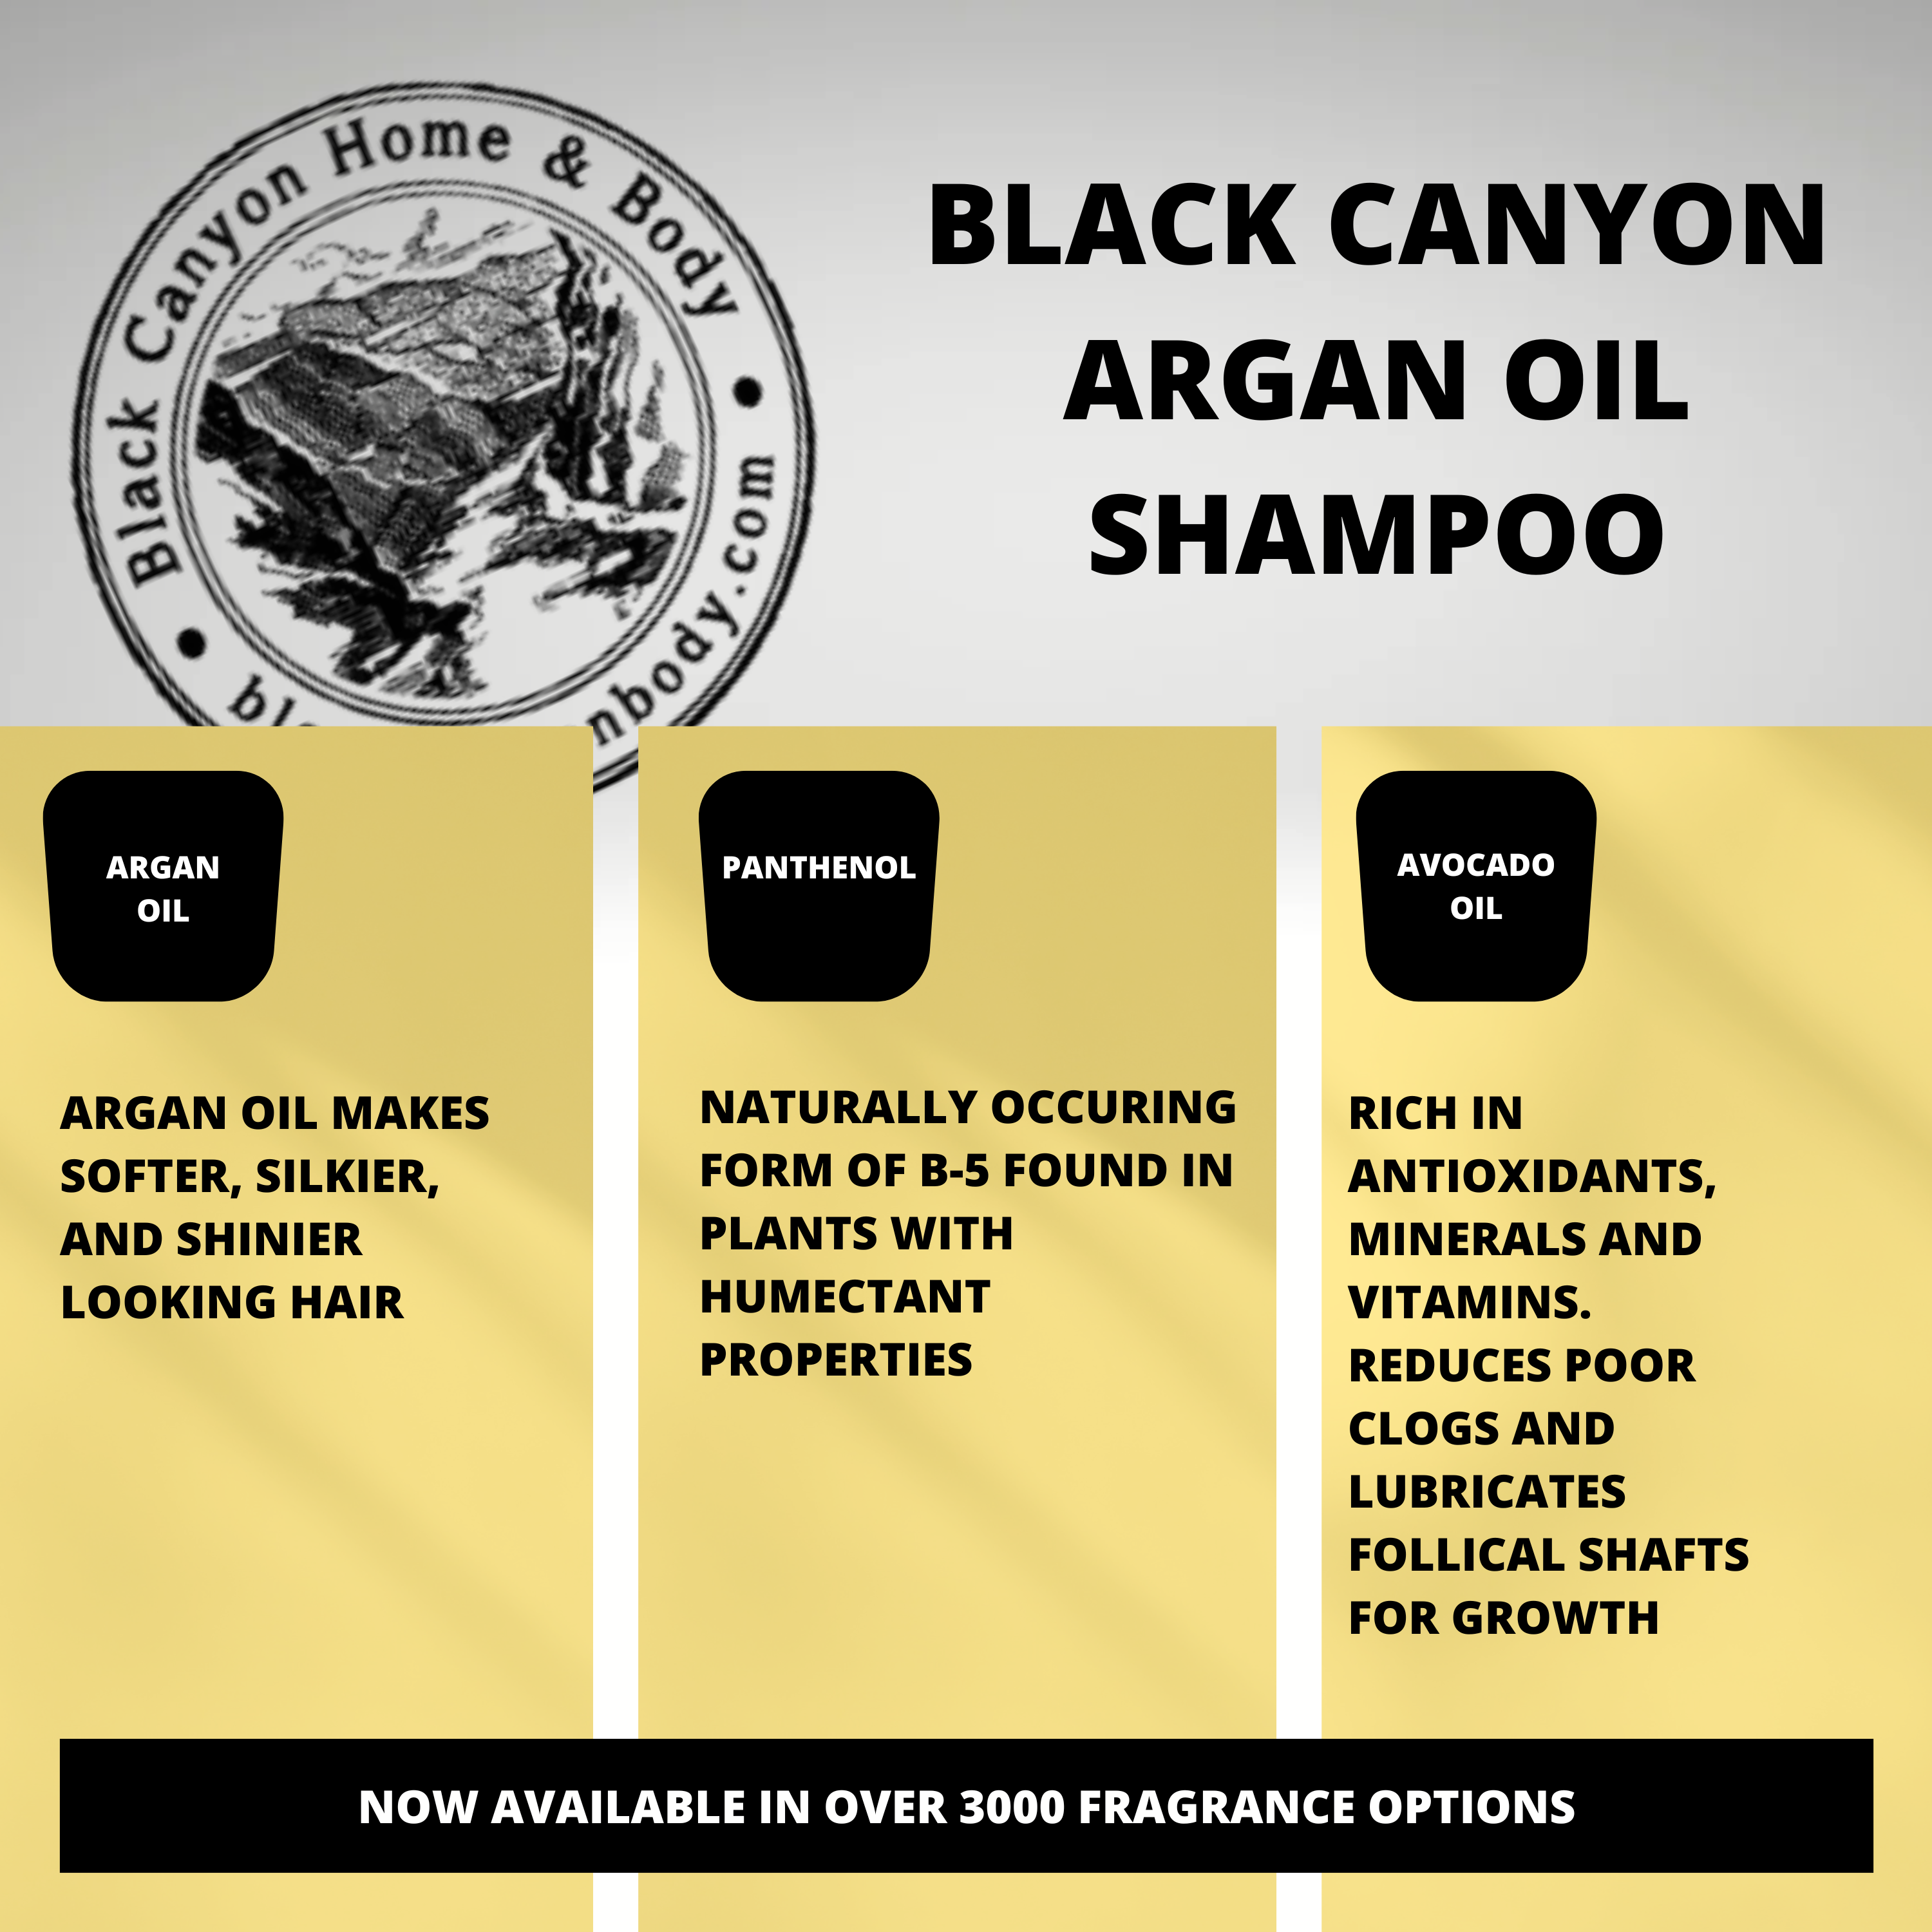 Black Canyon April Showers Scented Shampoo with Argan Oil